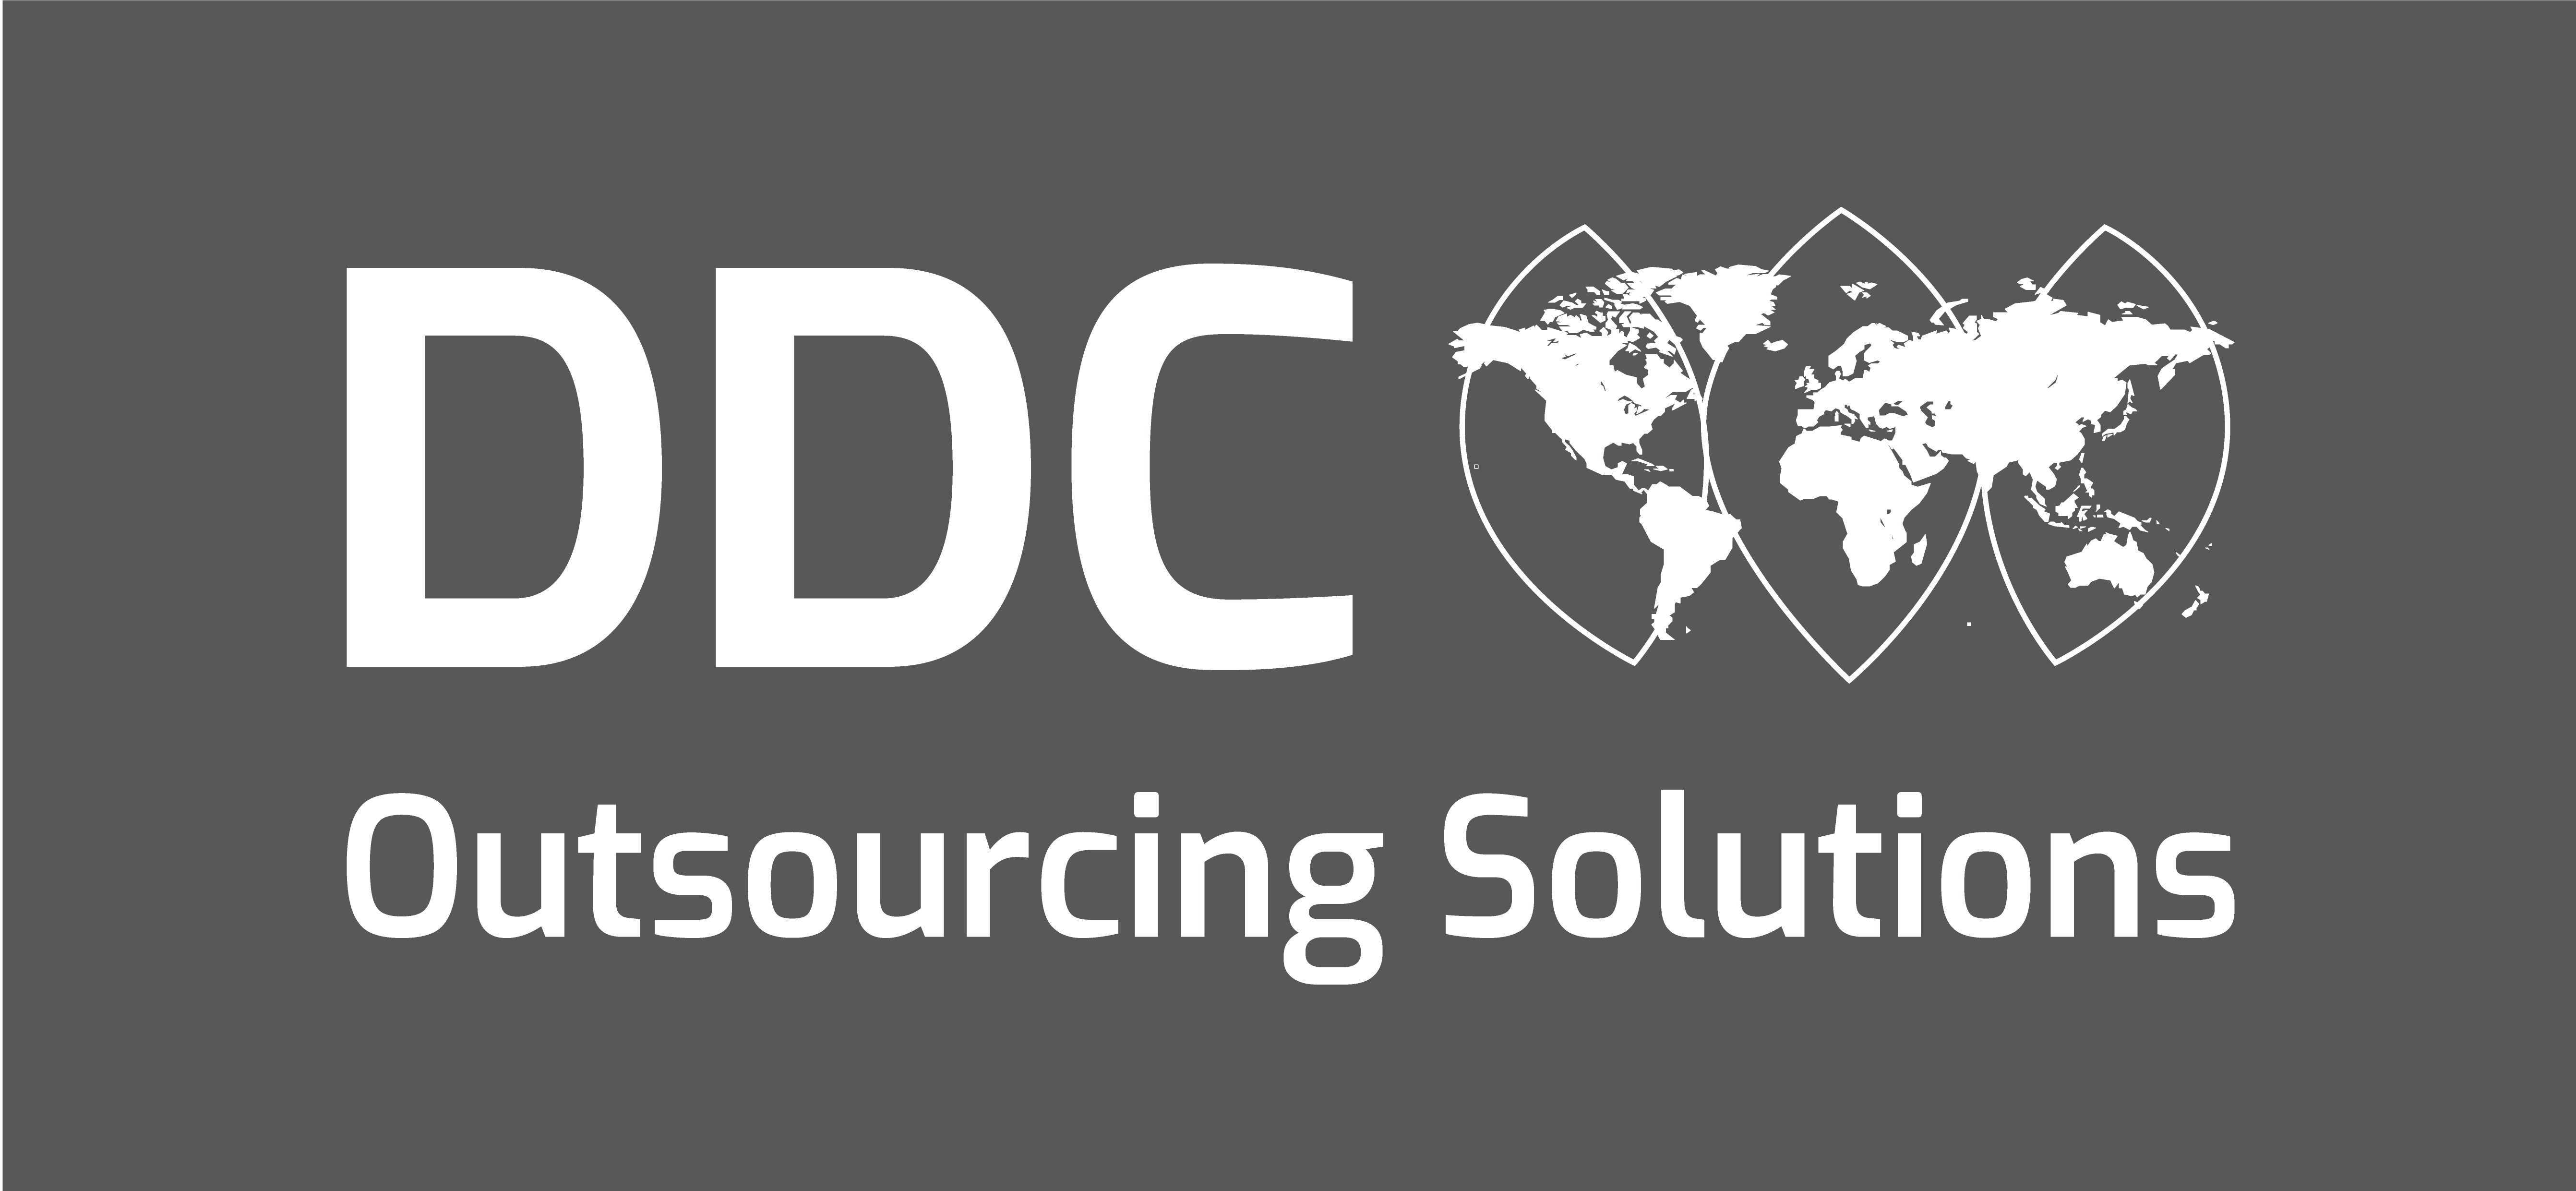 DDC Outsourcing Solutions